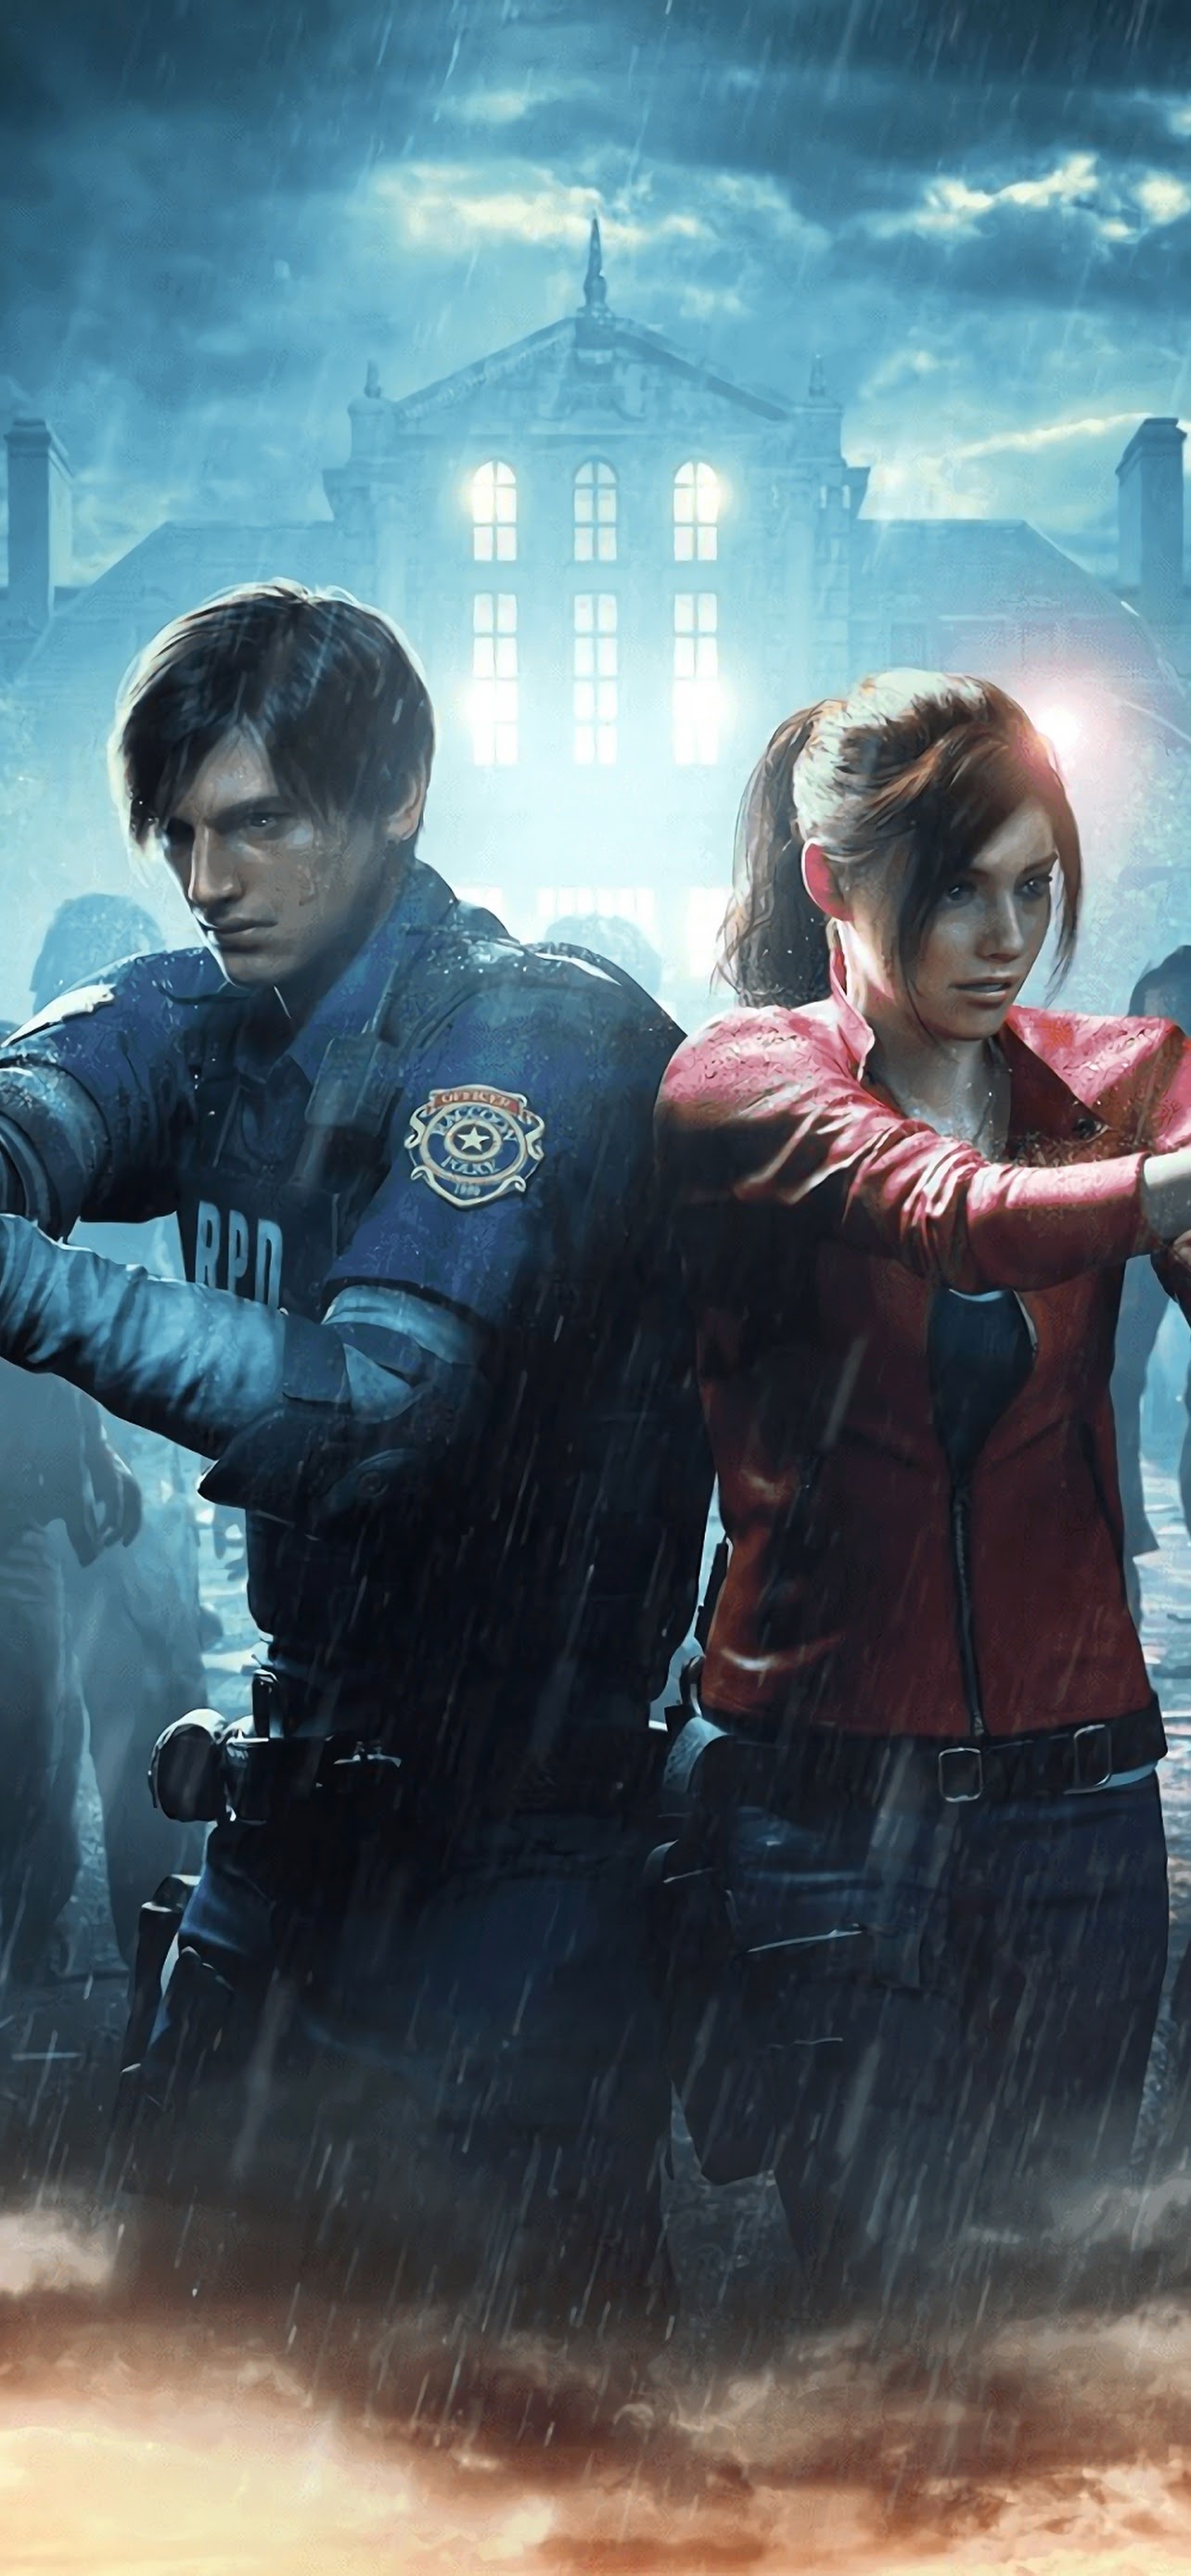 Leon S. Kennedy, Resident Evil 2, Claire Redfield, 4K wallpaper, 1290x2780 HD Phone